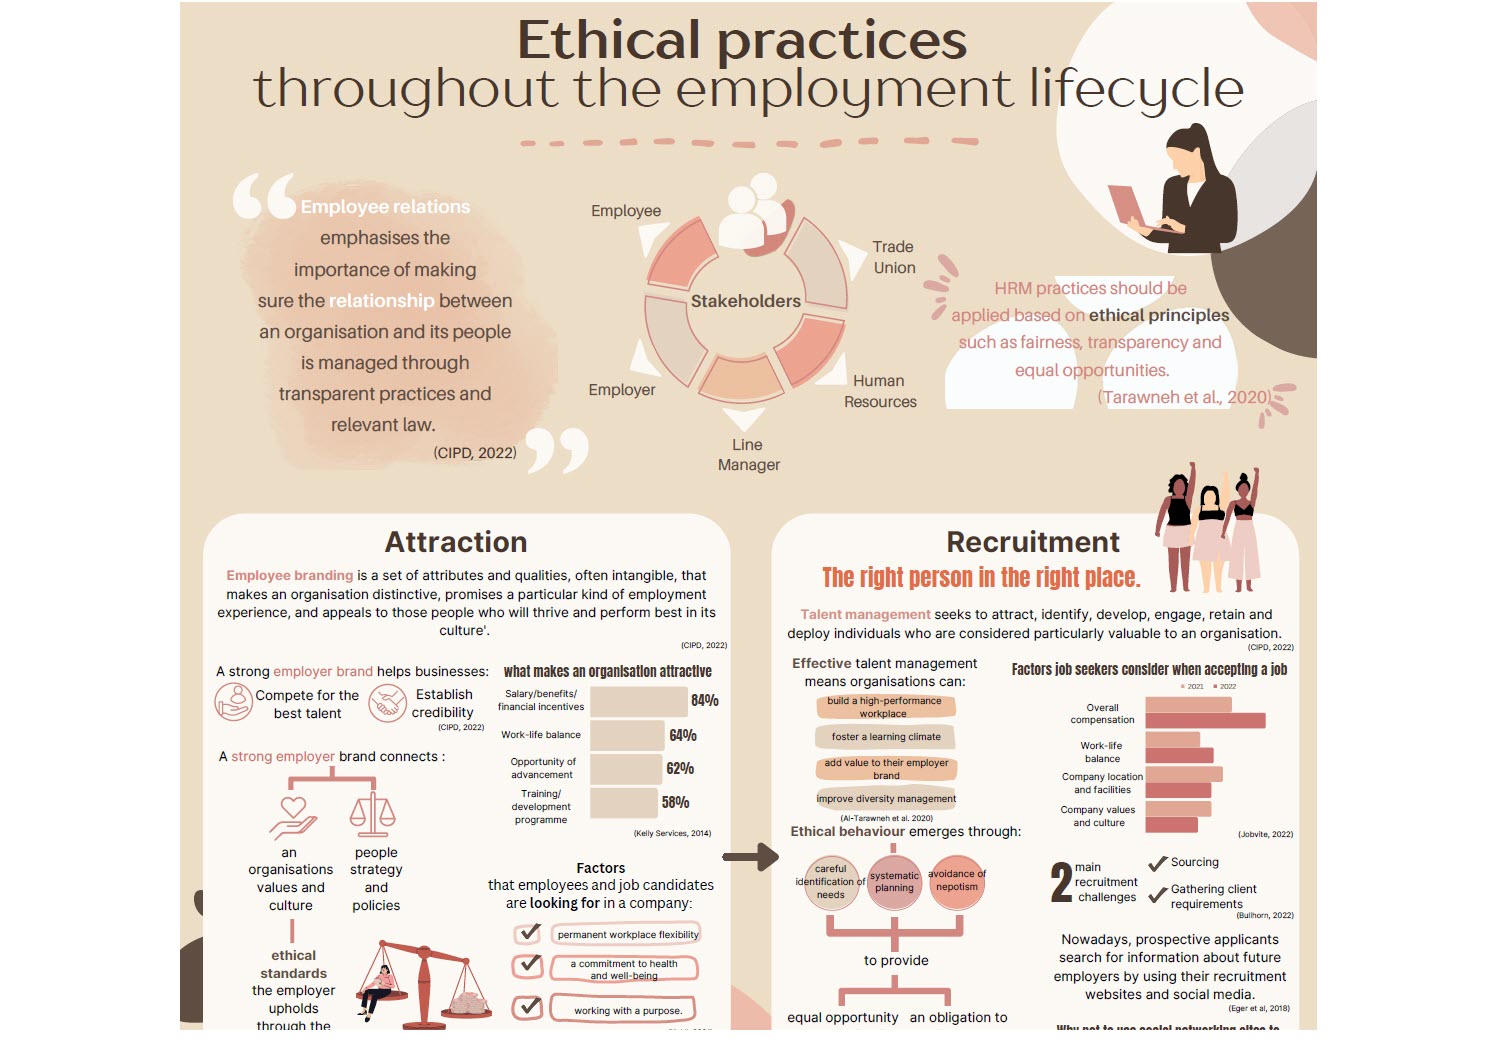 An image of a visually appealing infographic, with a coherent colour scheme, text in white boxes for easy reading, appealing graphics to accompany the text and enhance understanding. 